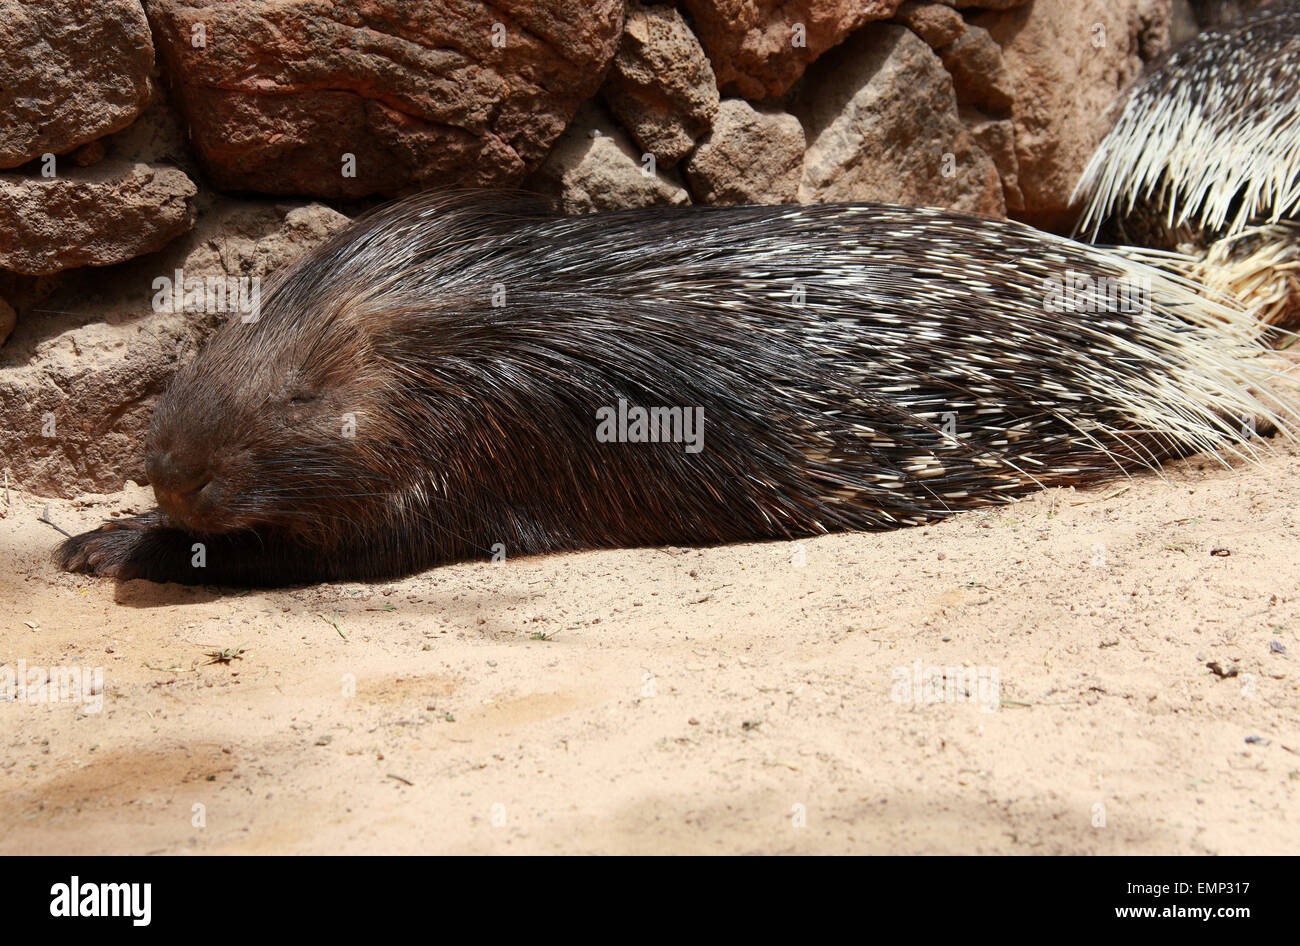 Crested Porcupine, Hystrix cristata, Hystricidae, Mammalia.  It is found in Italy, North Africa and sub-Saharan Africa. Stock Photo